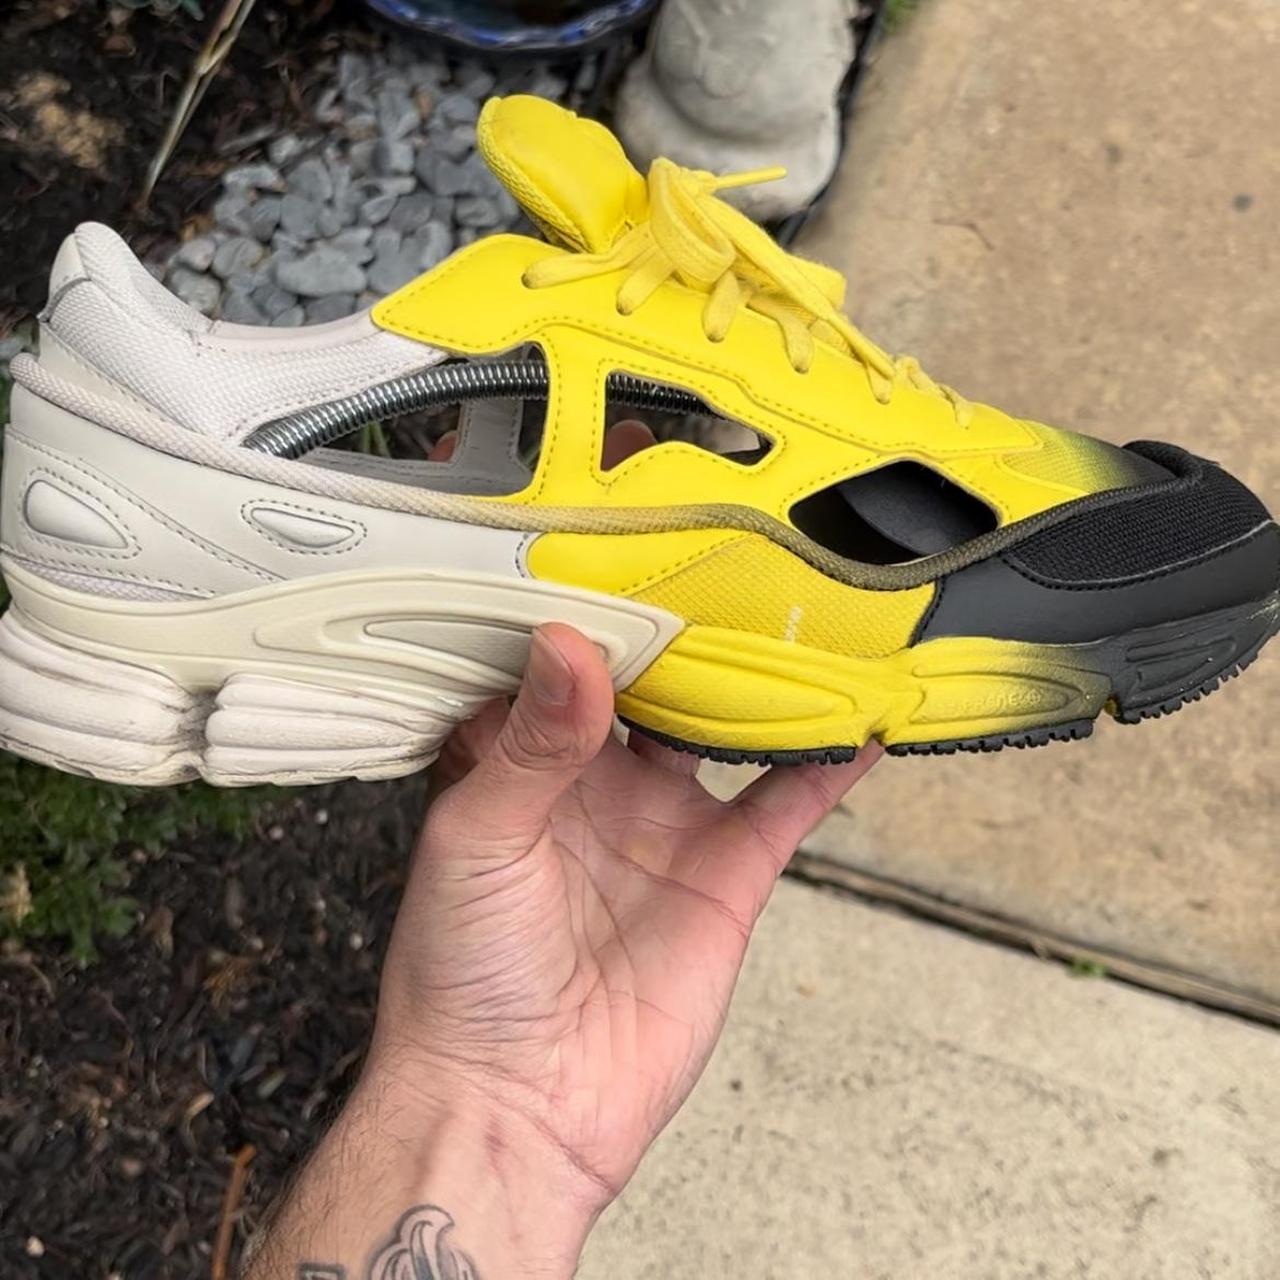 Raf Simons Men's Yellow and Black Trainers (3)